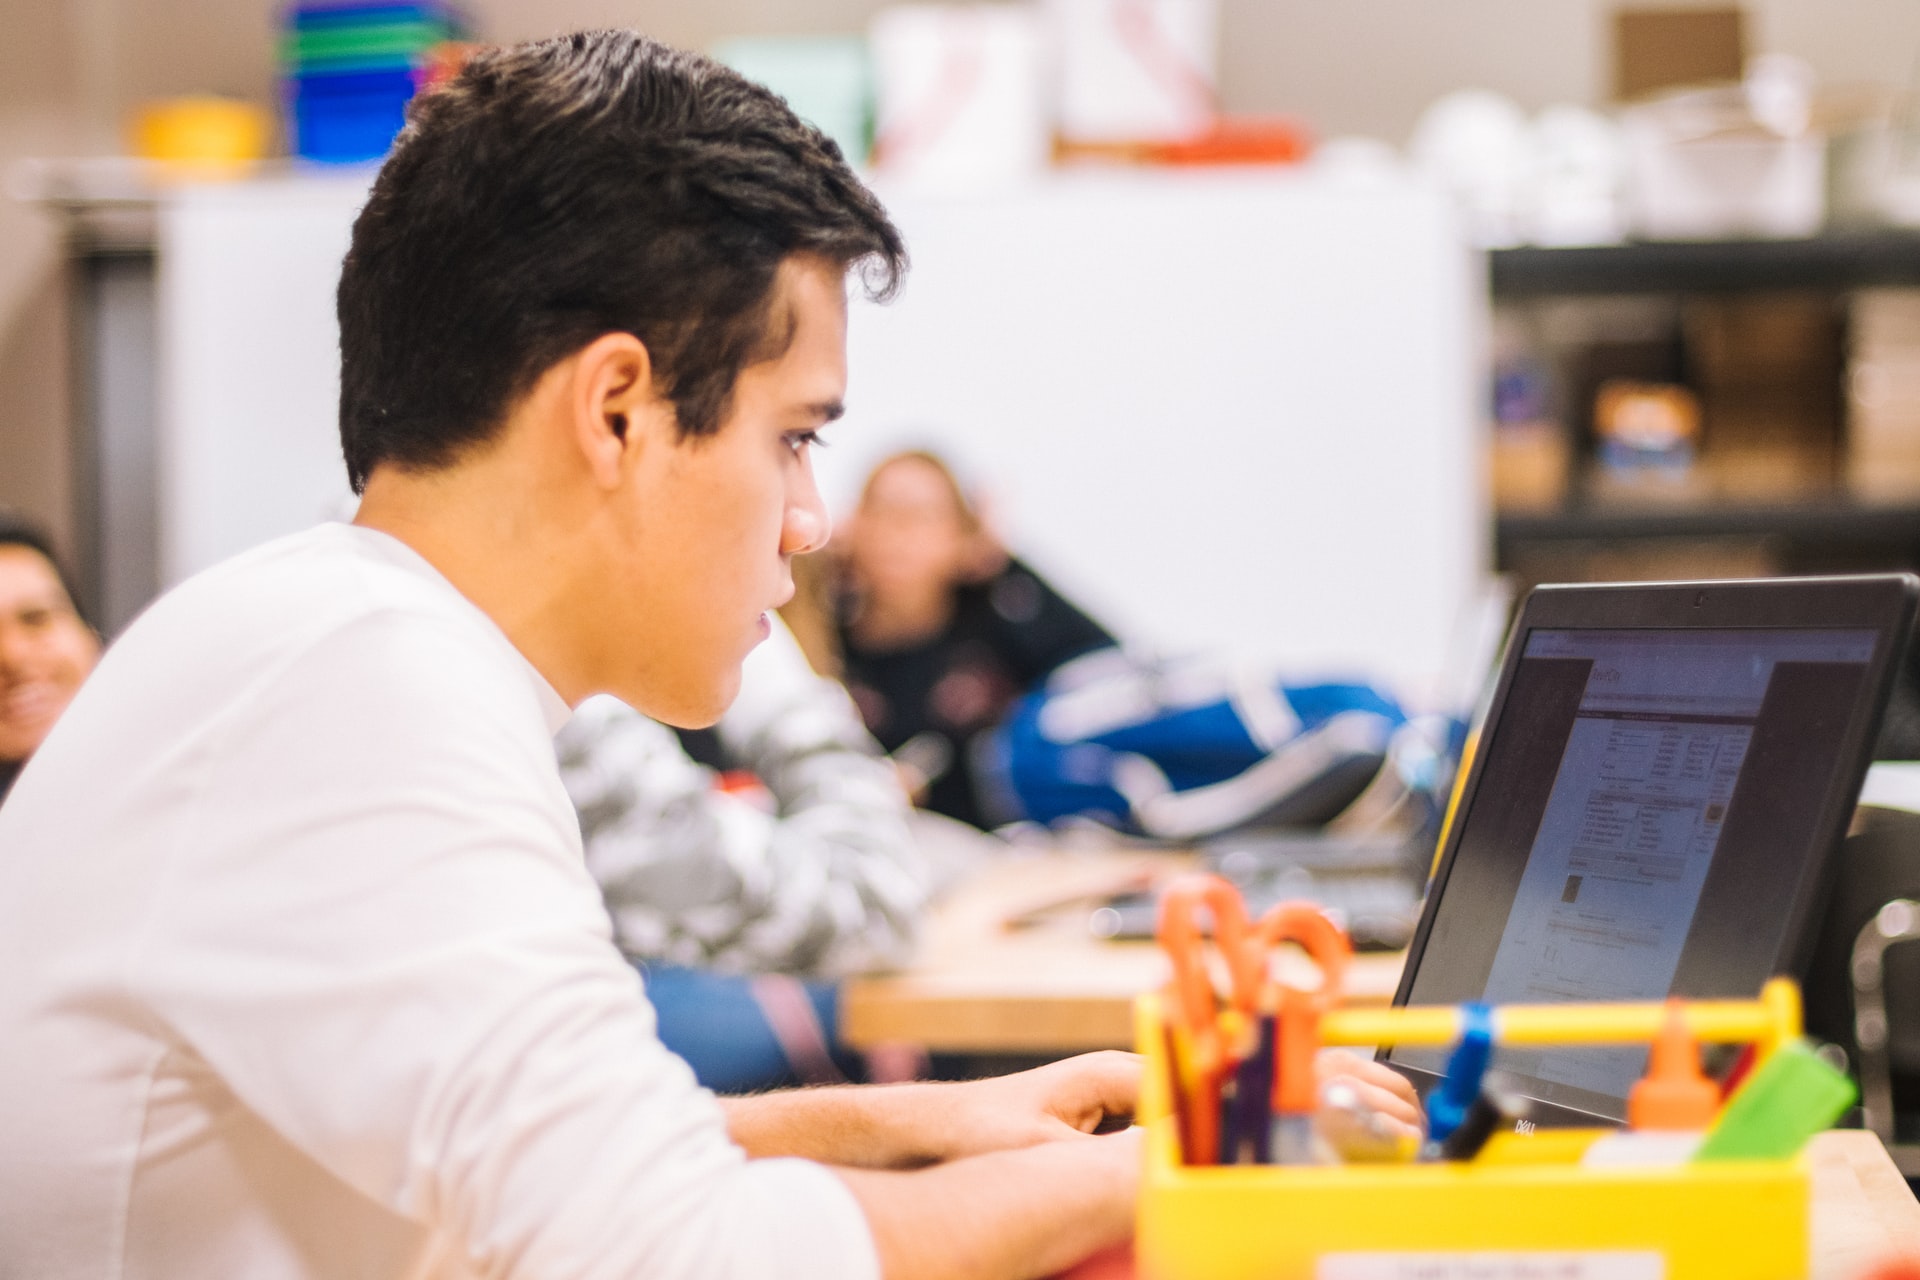 6 reasons to use EdTech tools to save valuable classroom time.